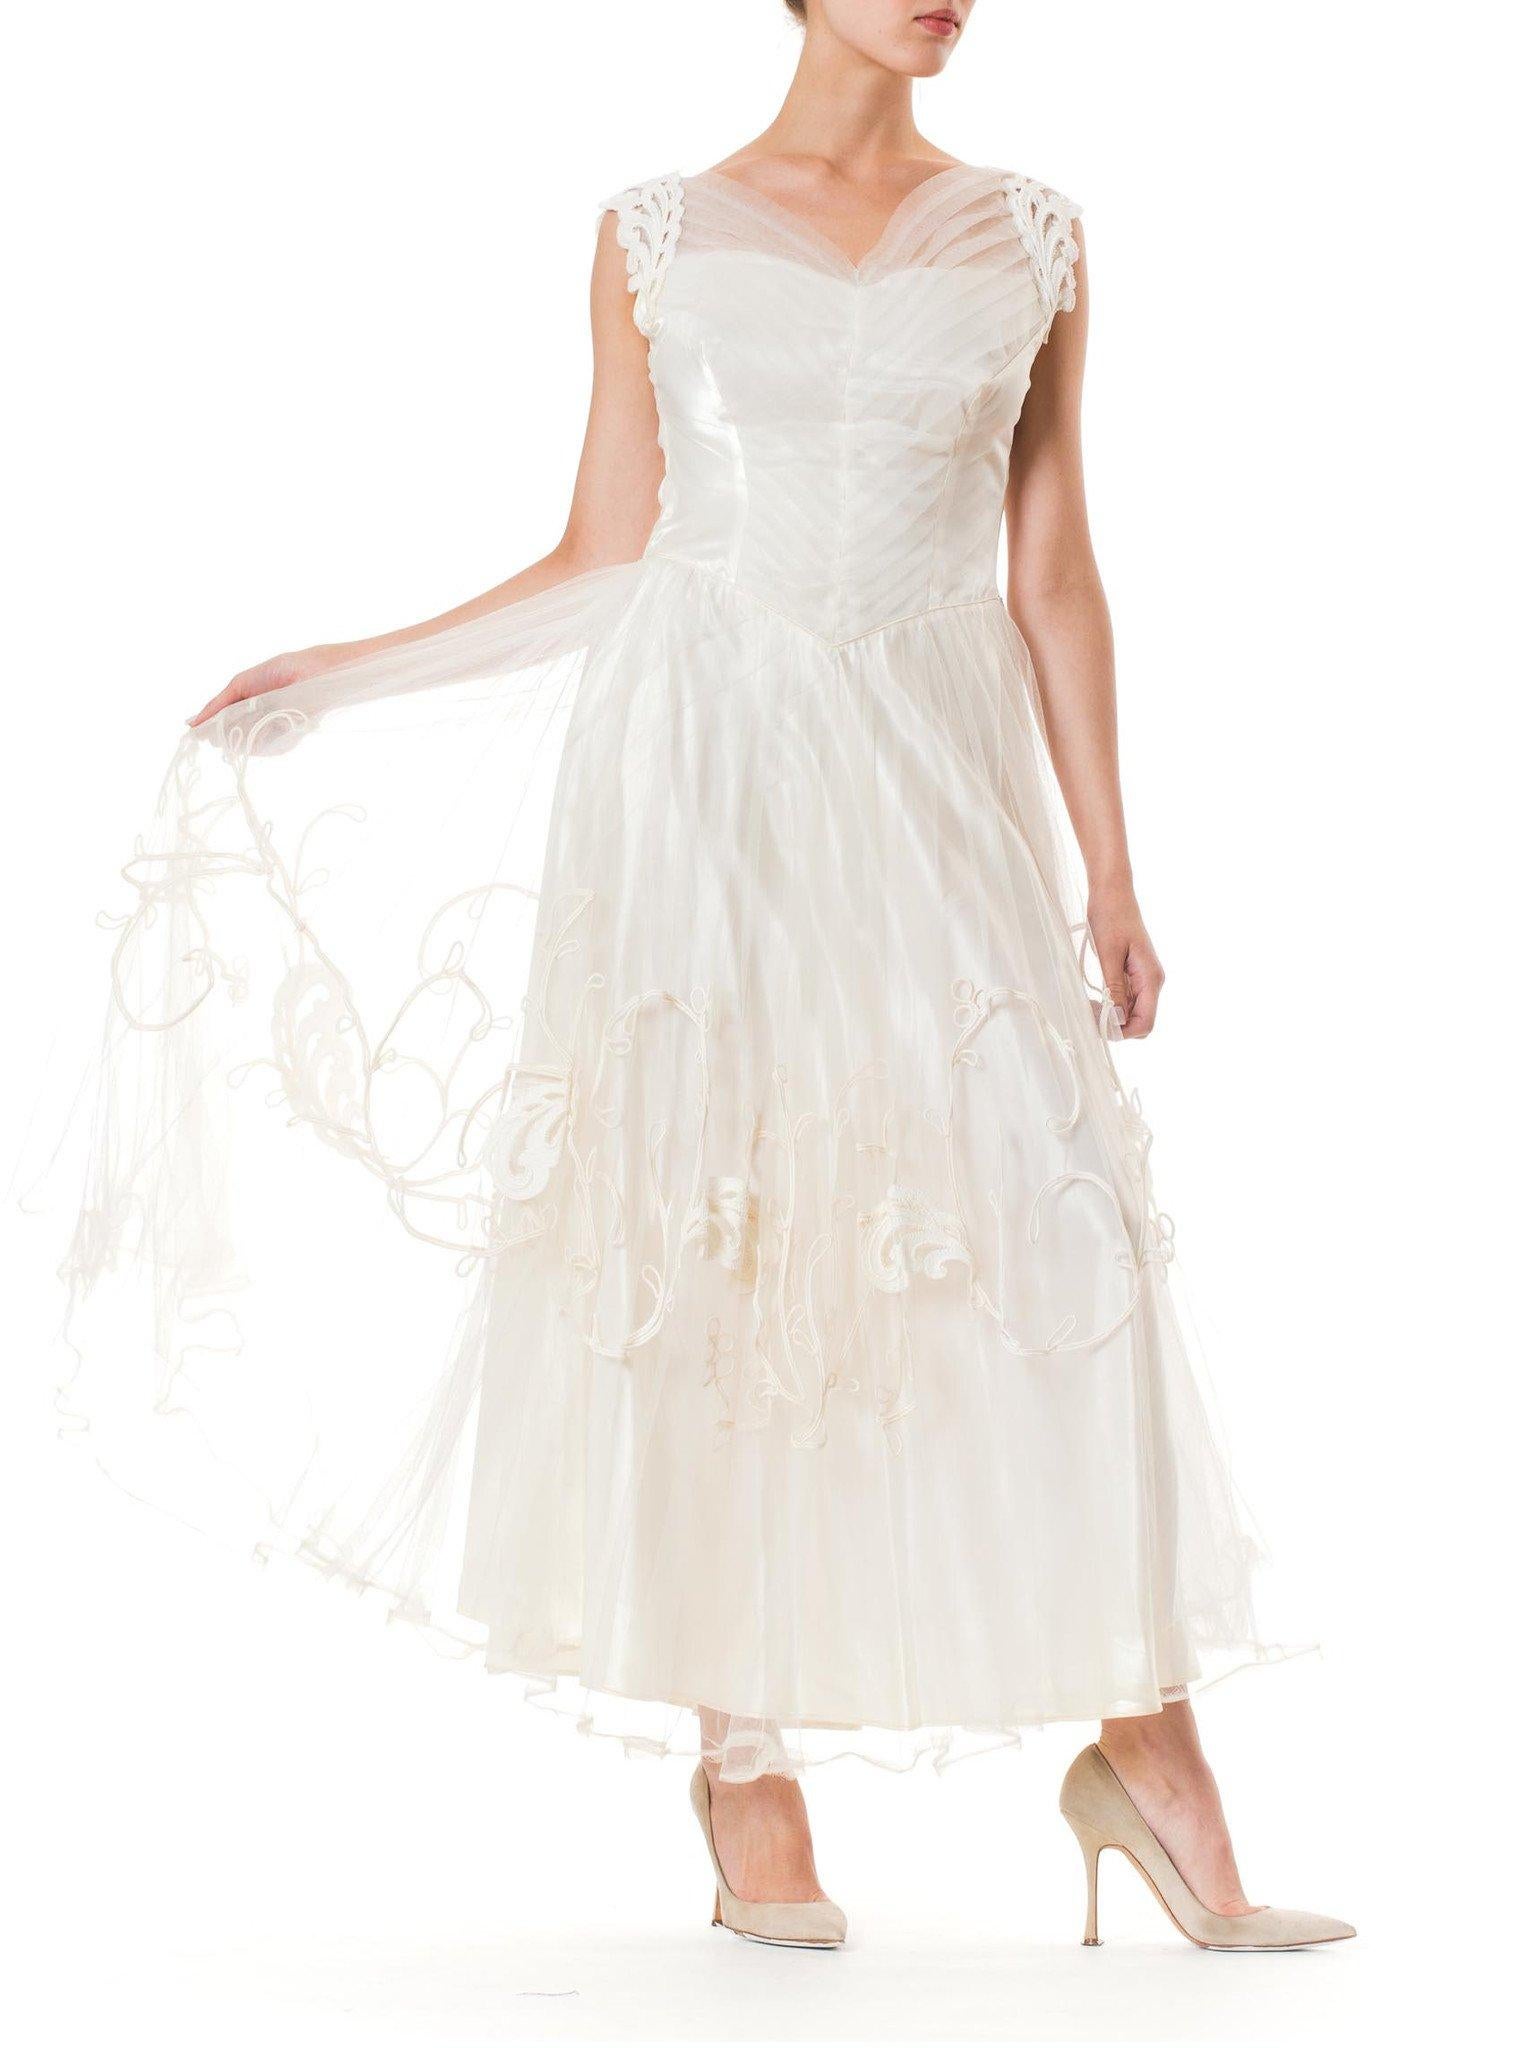 1950S  White Embroidered Rayon & Nylon Satin Tulle Fit Flare Bridal Gown In Excellent Condition For Sale In New York, NY